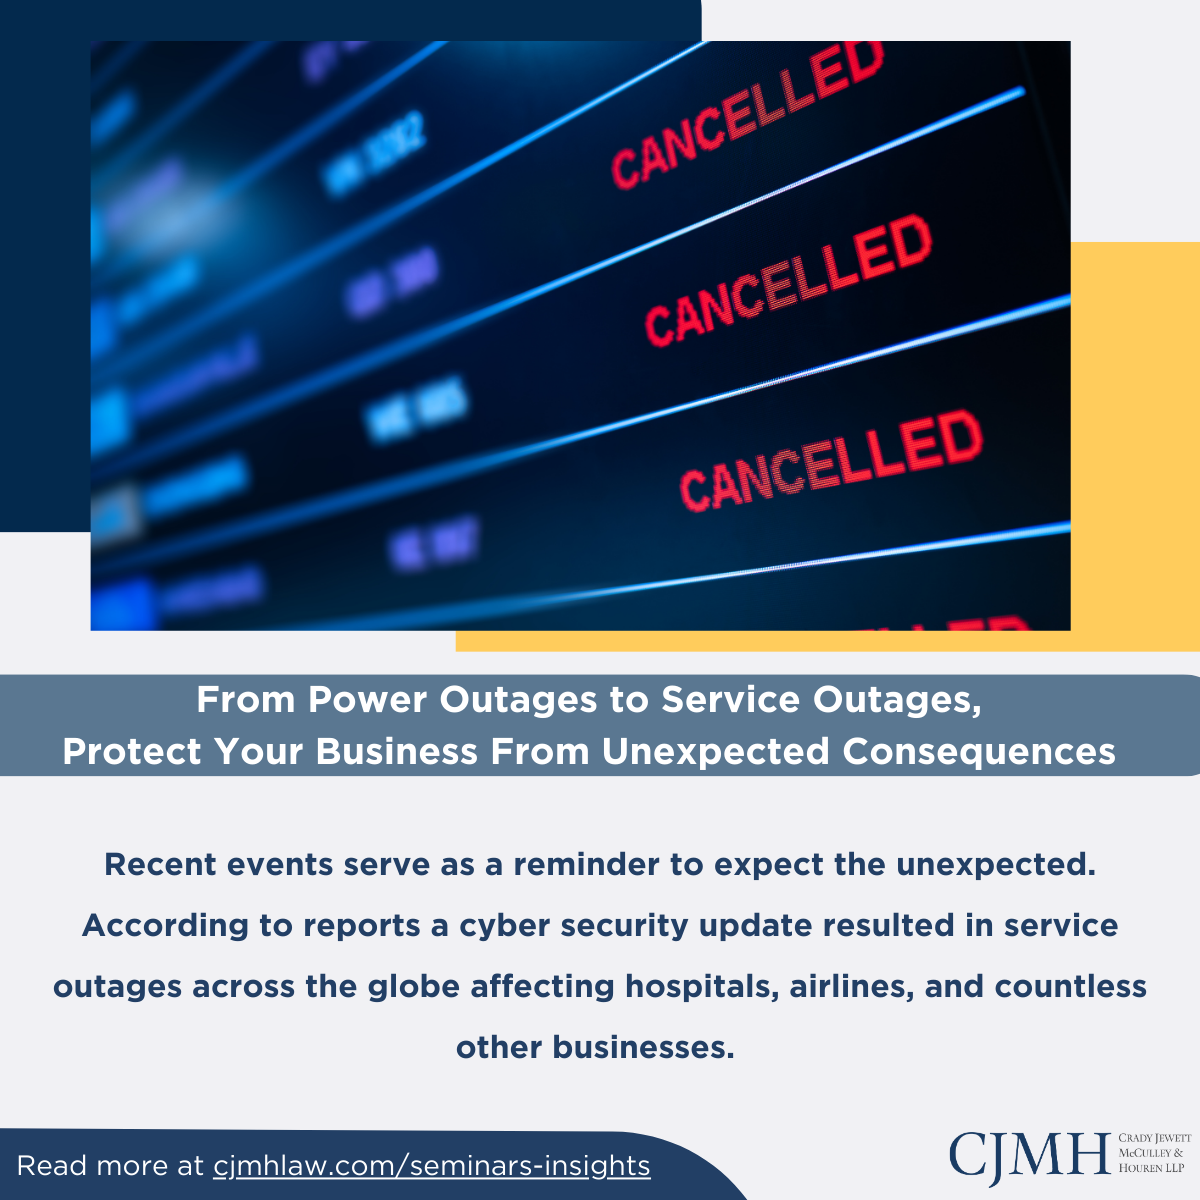 From Power Outages to Service Outages, Protect Your Business From Unexpected Consequences